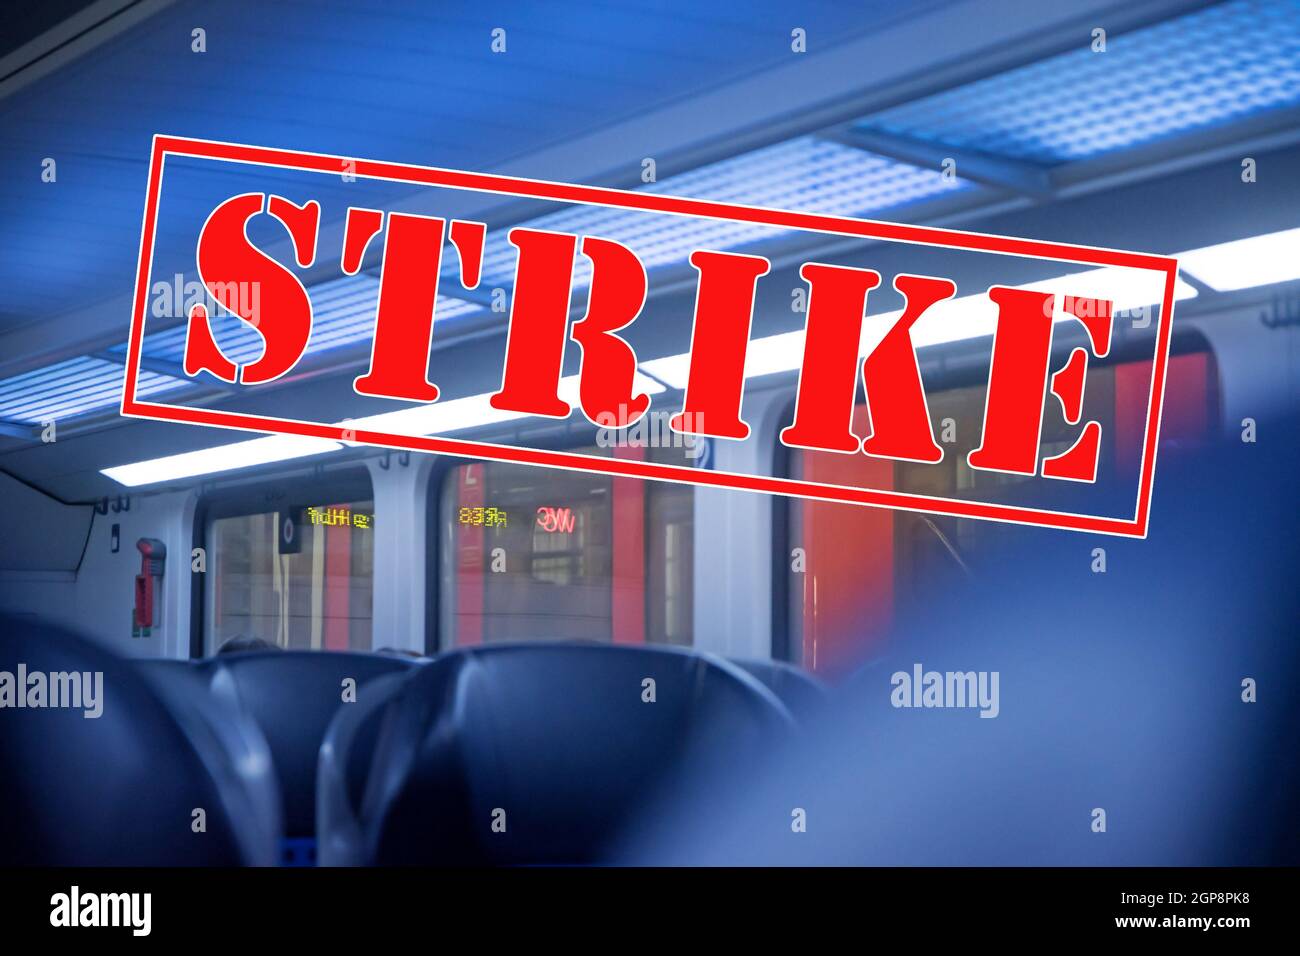 Inside a train without passengers and banner with text Strike, transportation and trade union concept with blurred abstract background in blue and red Stock Photo